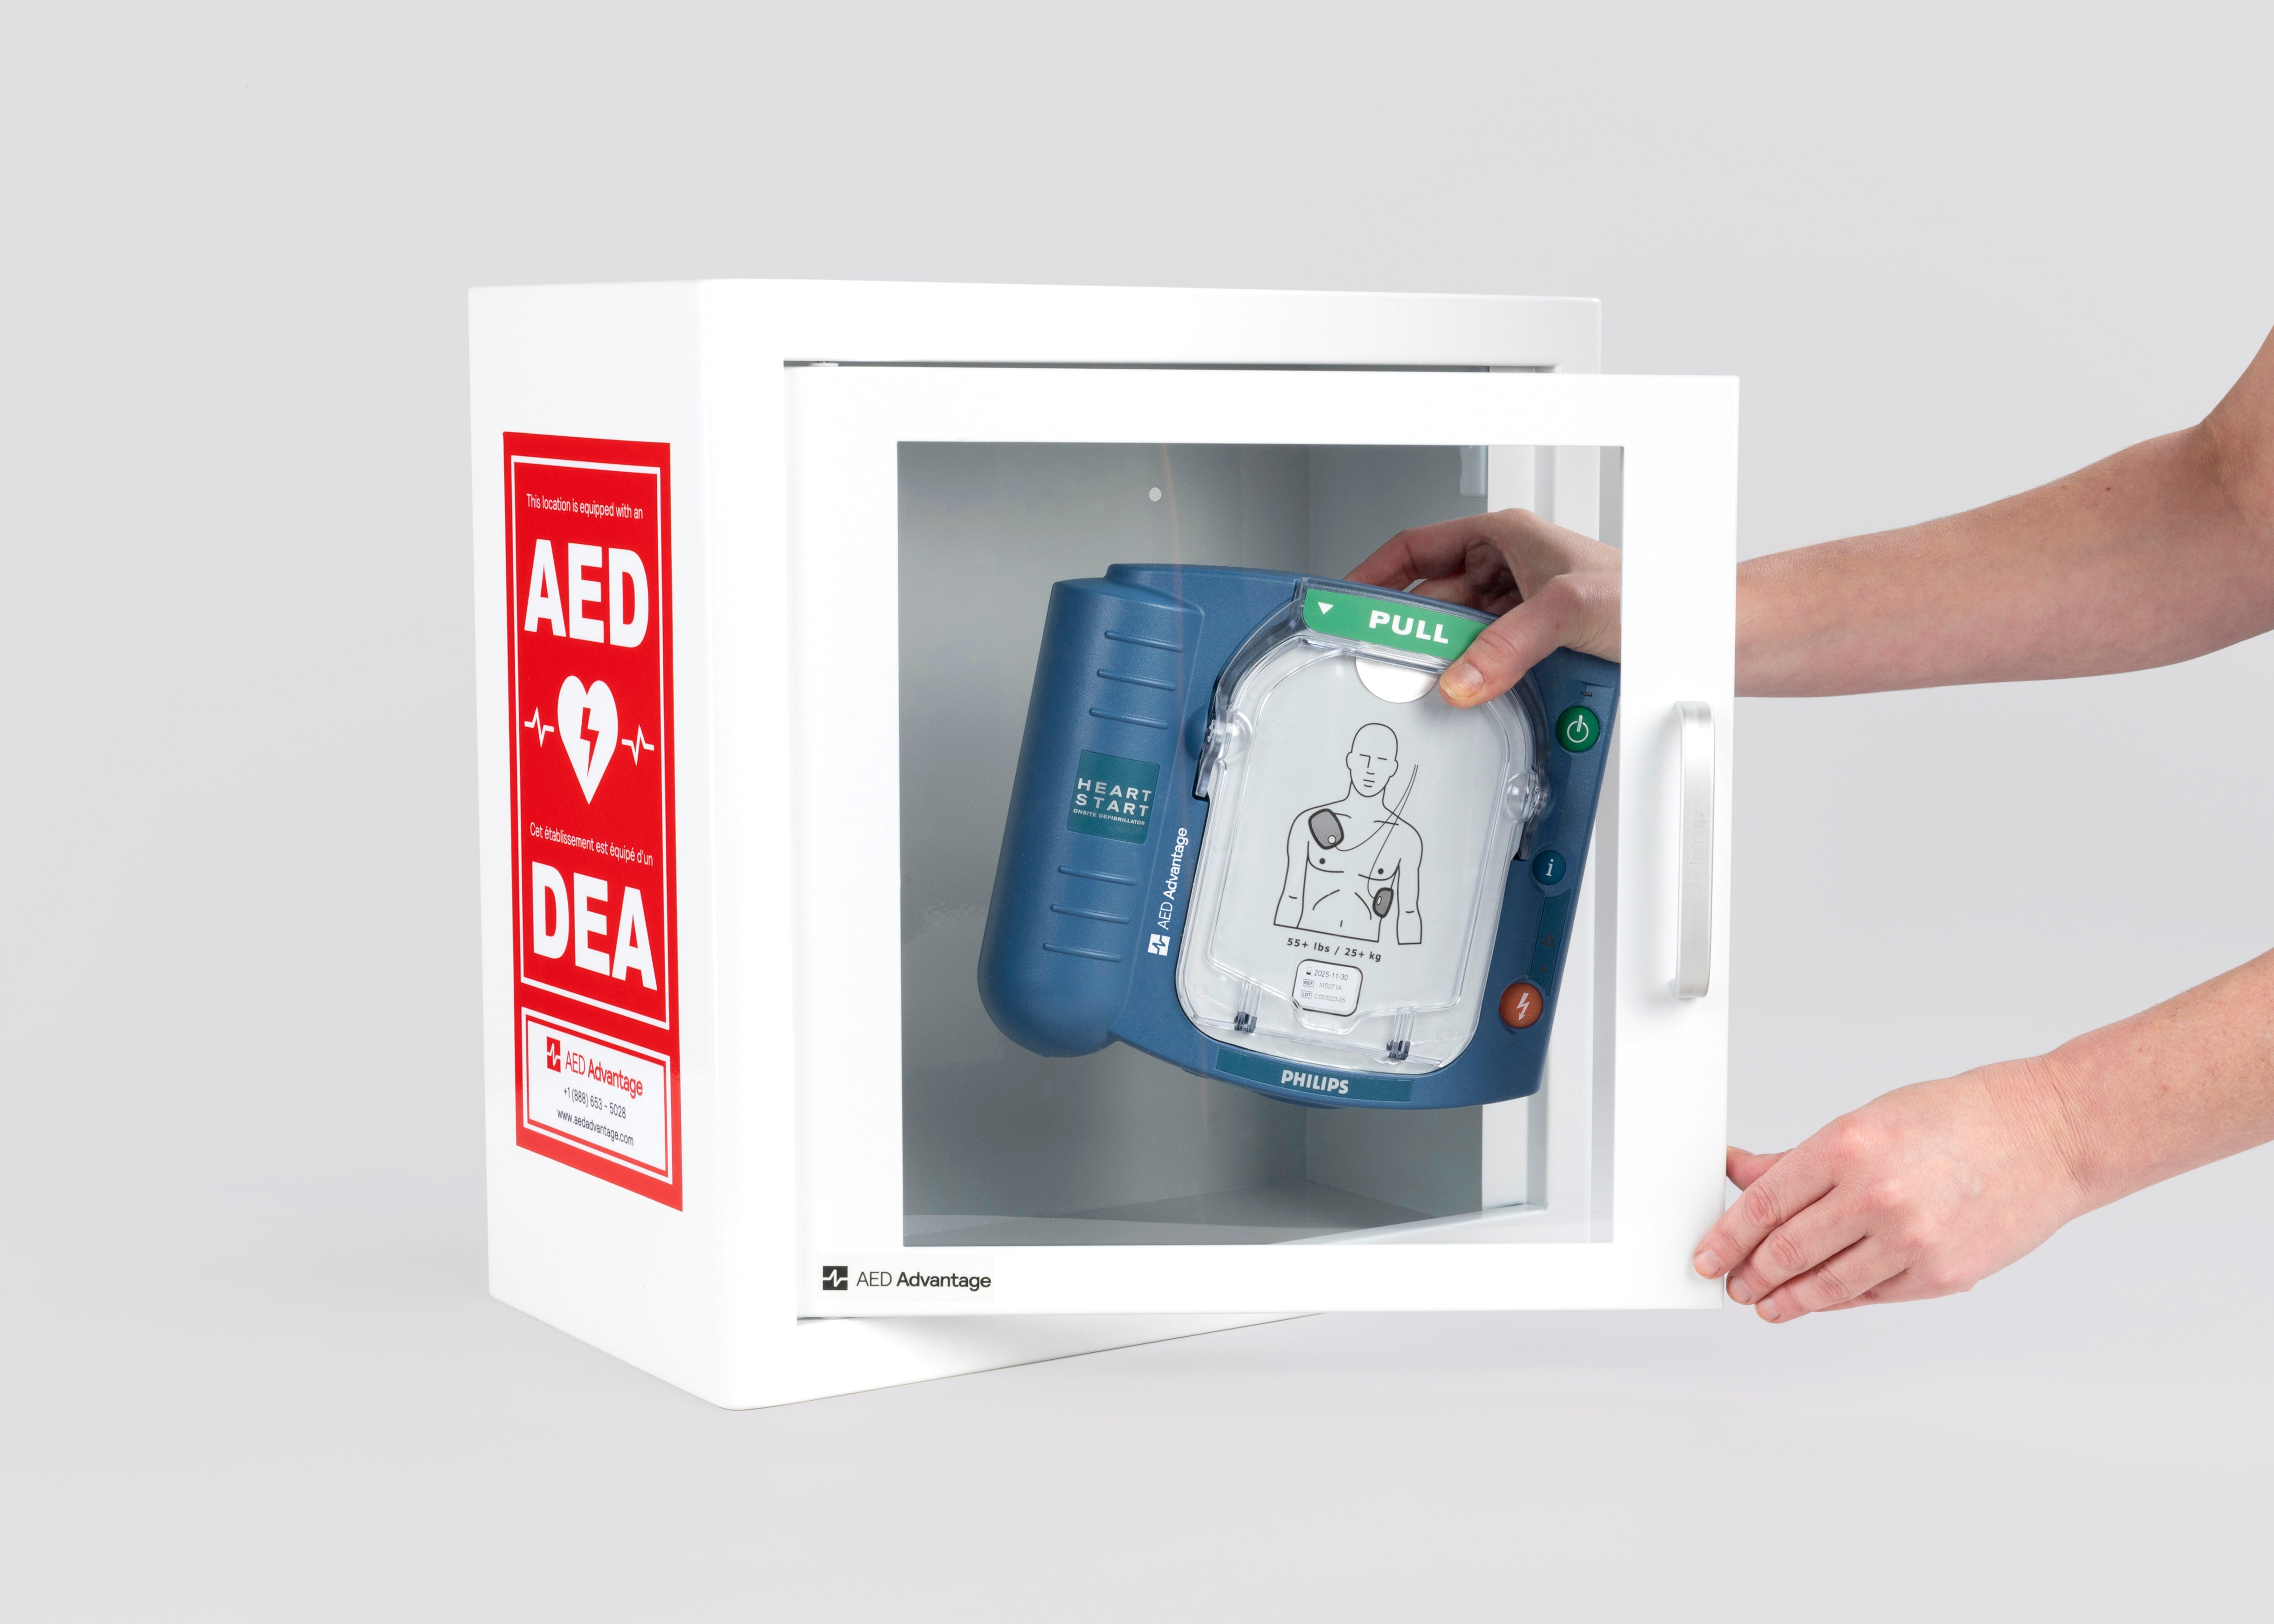 A blue Philips OnSite AED being retrieved by hand from a white metal cabinet with red decals